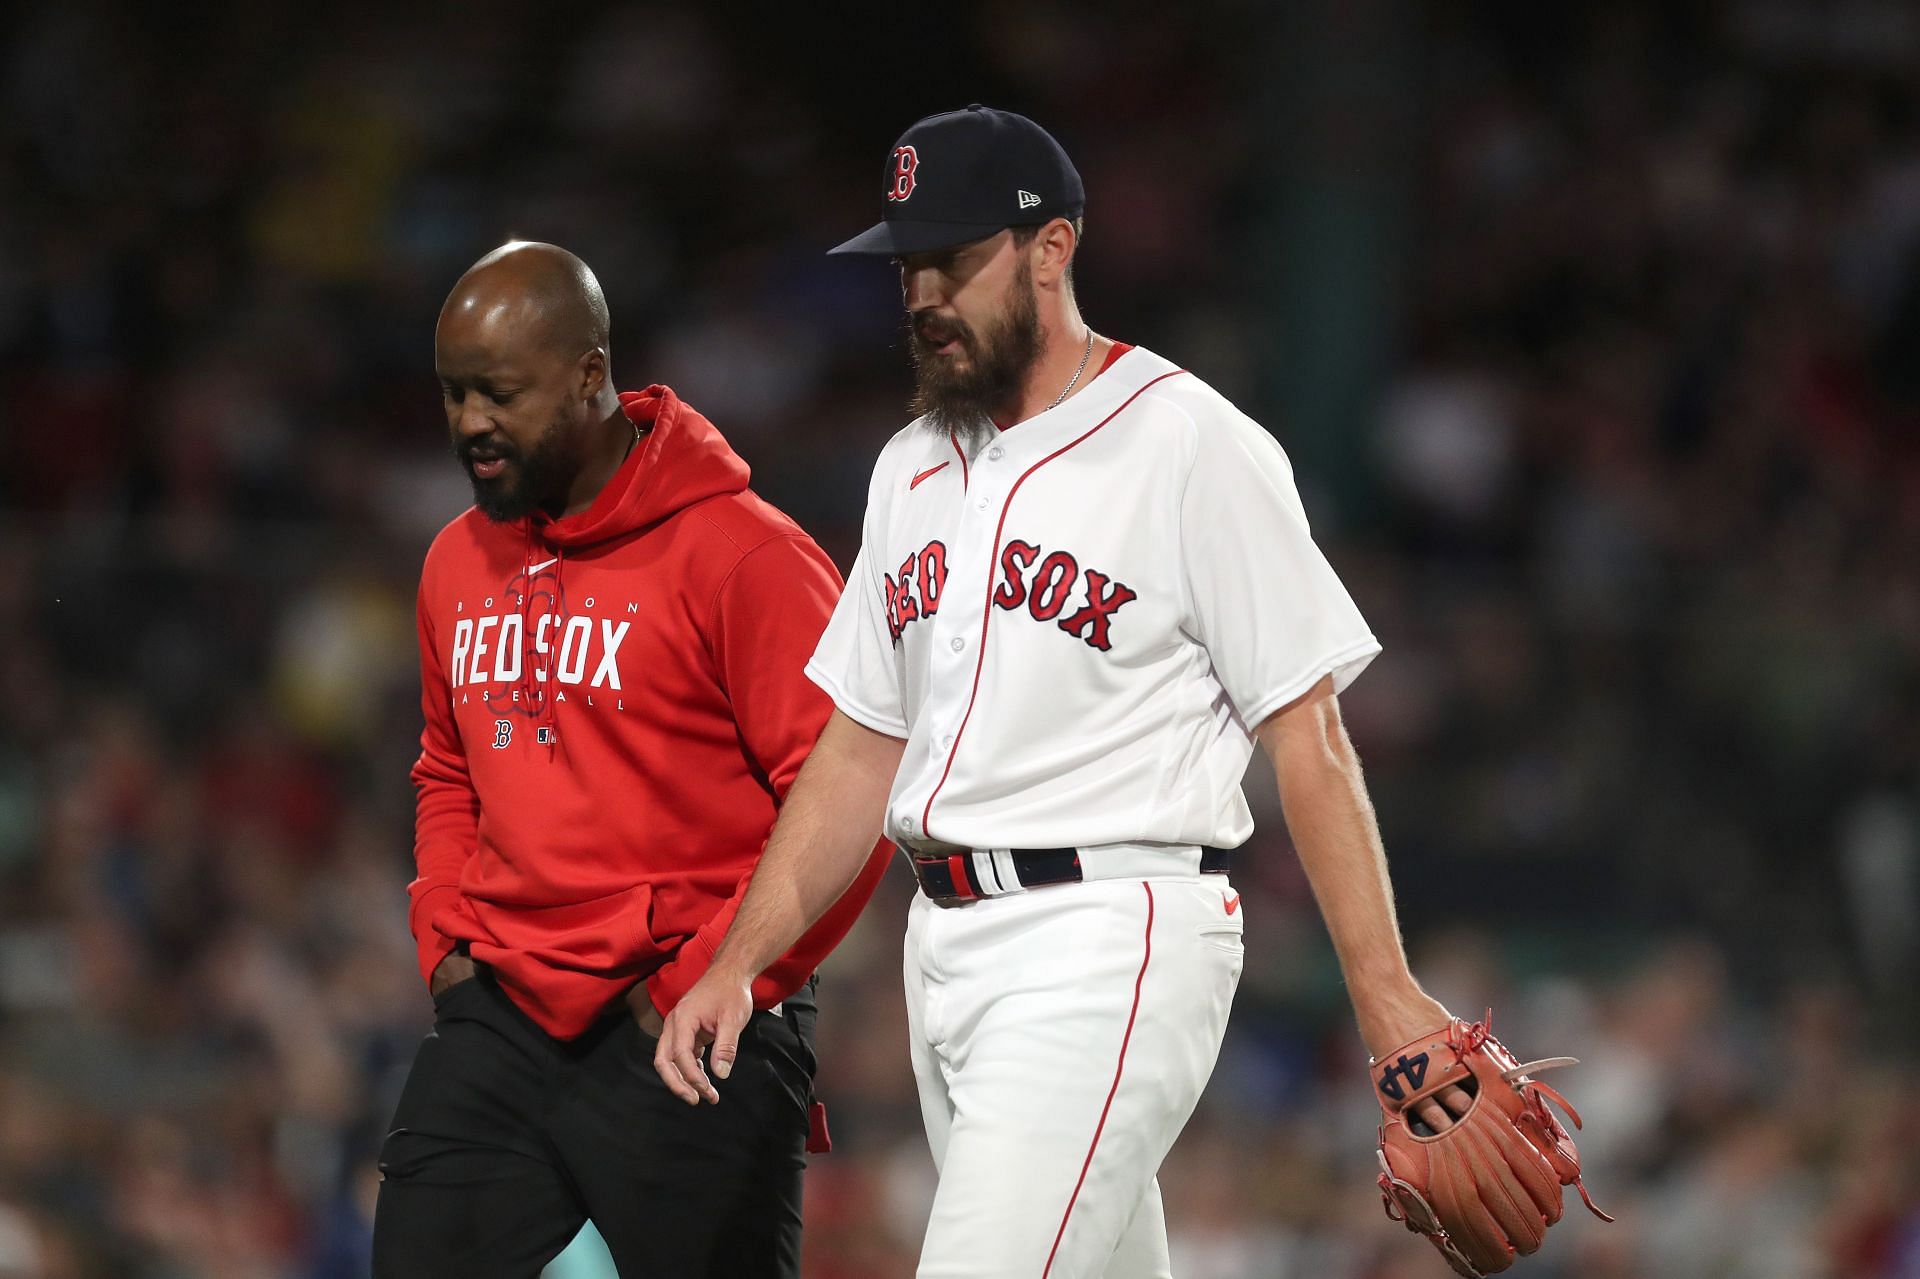 Injuries are up for MLB pitchers